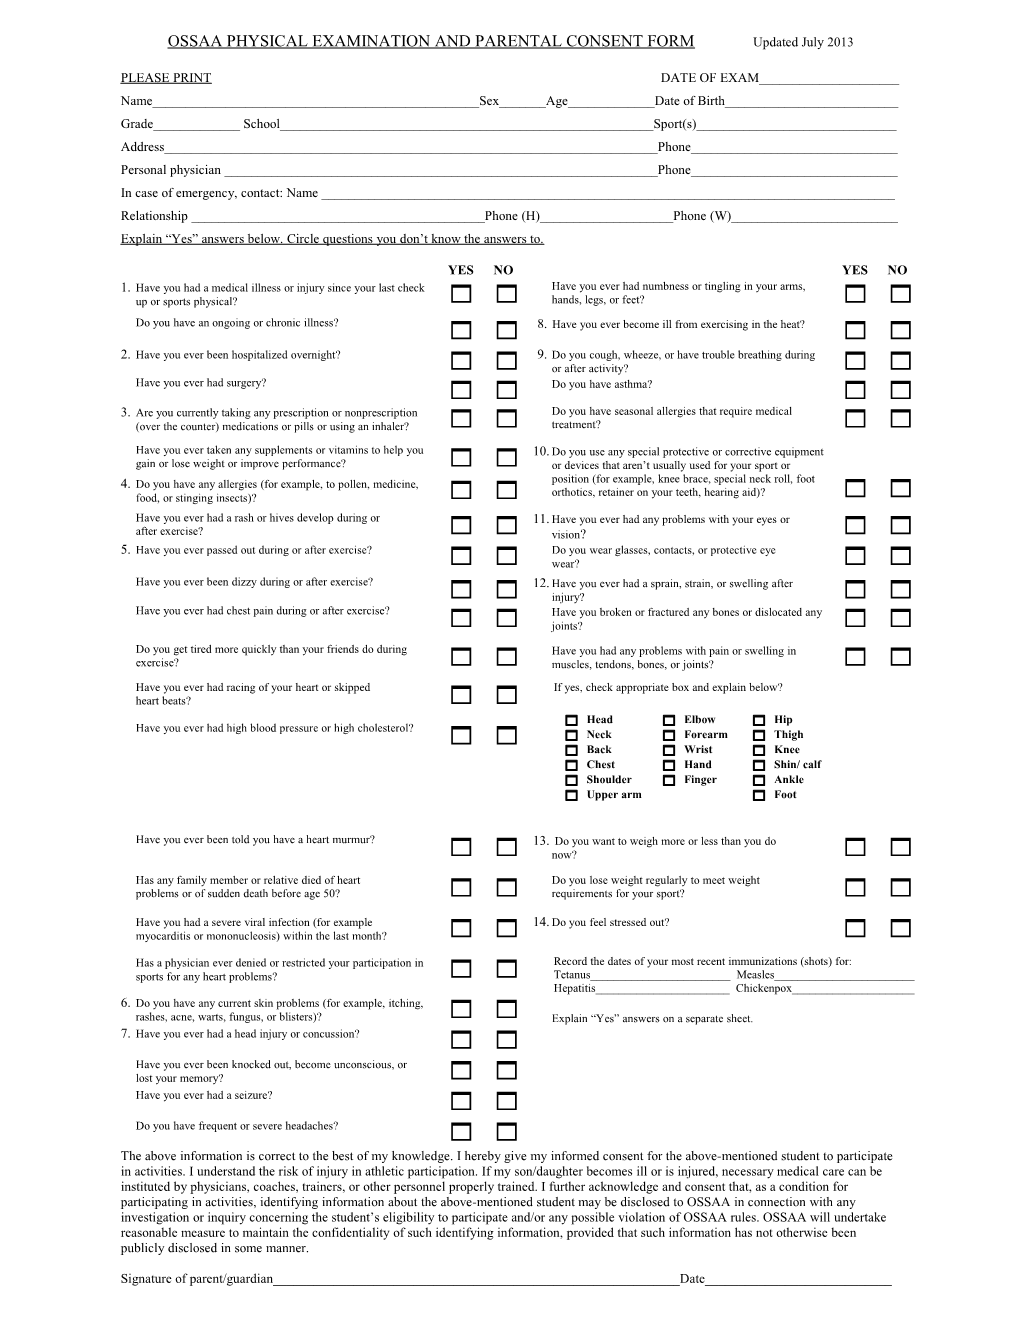 OSSAA PHYSICAL EXAMINATION and PARENTAL CONSENT FORM Updated July 2013